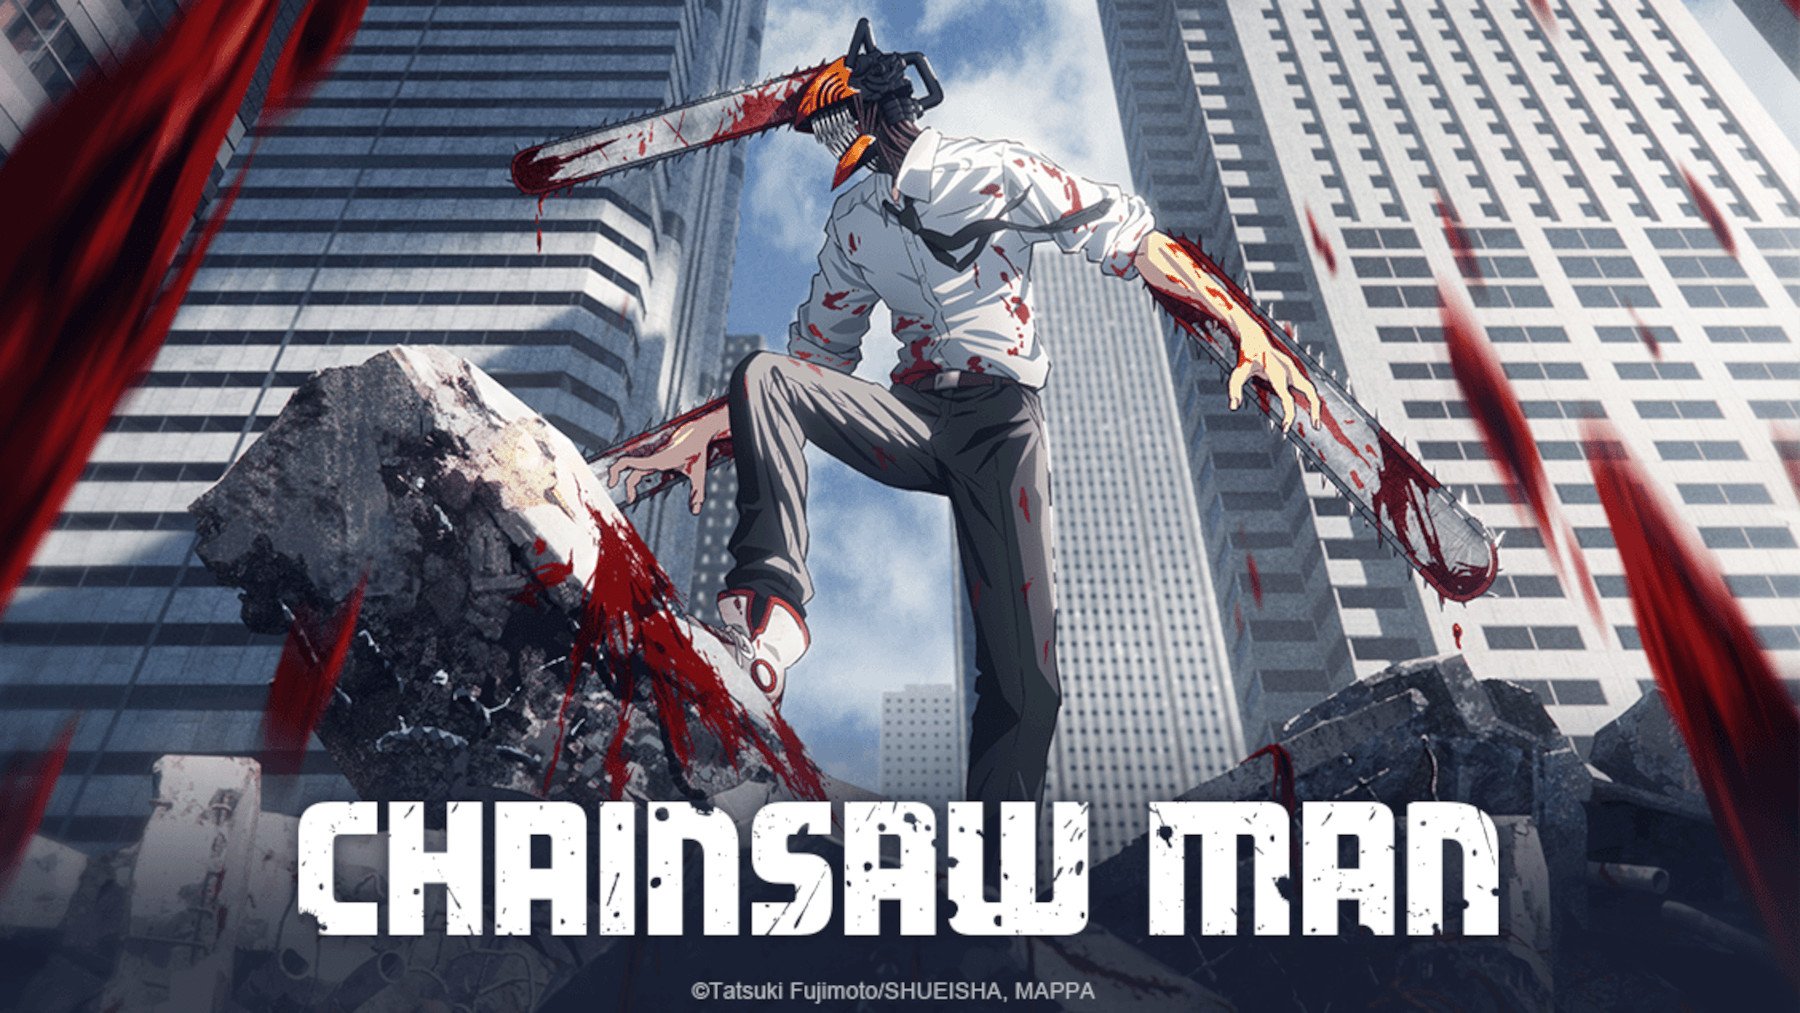 Key art for the 'Chainsaw Man' anime which features a boy who's merged with a chainsaw demon. He's standing in front of tall buildings and covered in blood.